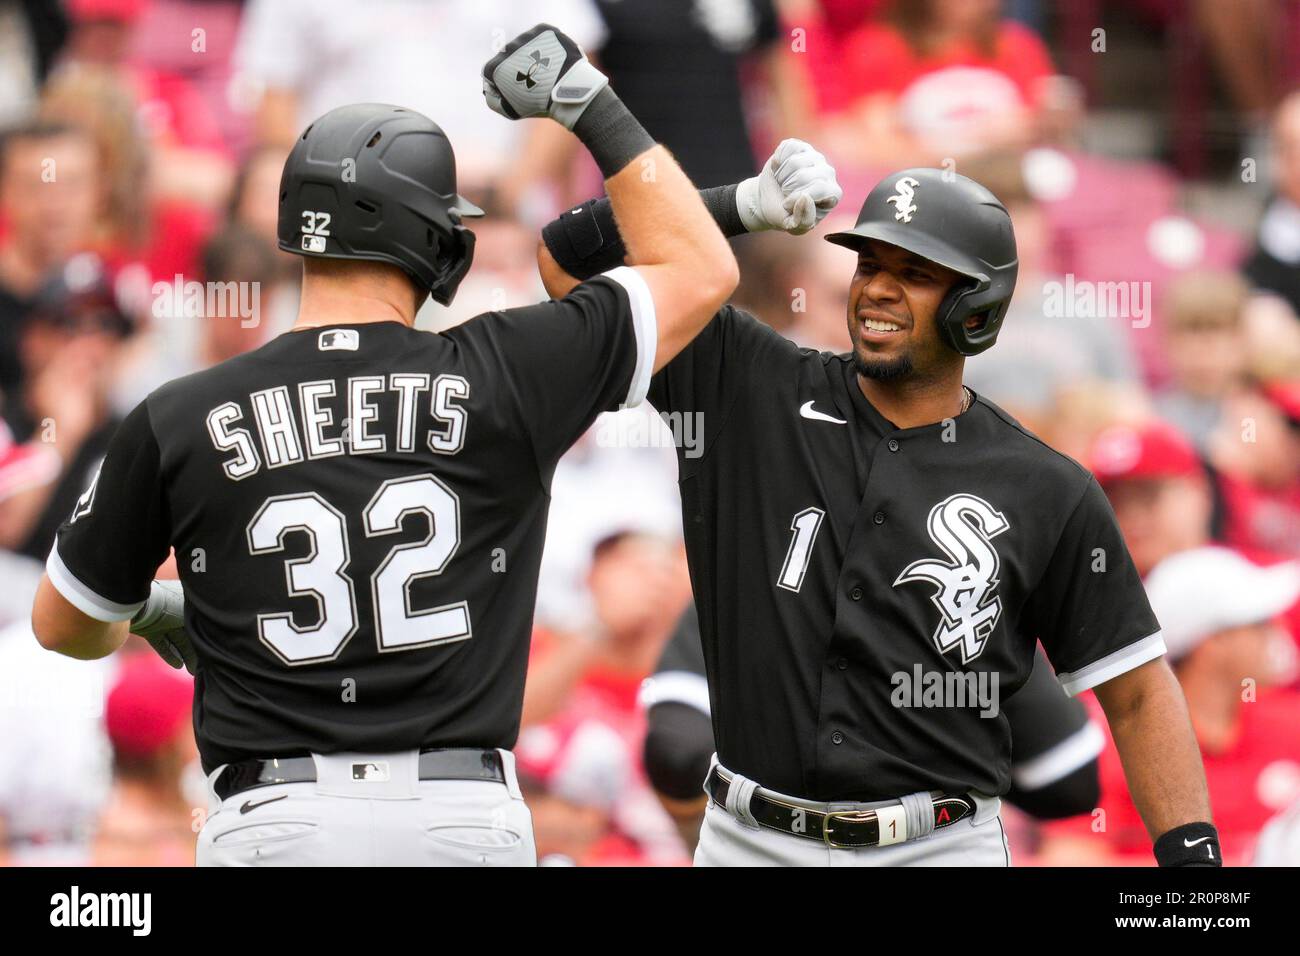 Chicago White Sox's Gavin Sheets (32) celebrates with Elvis Andrus (1)  after hitting a home run